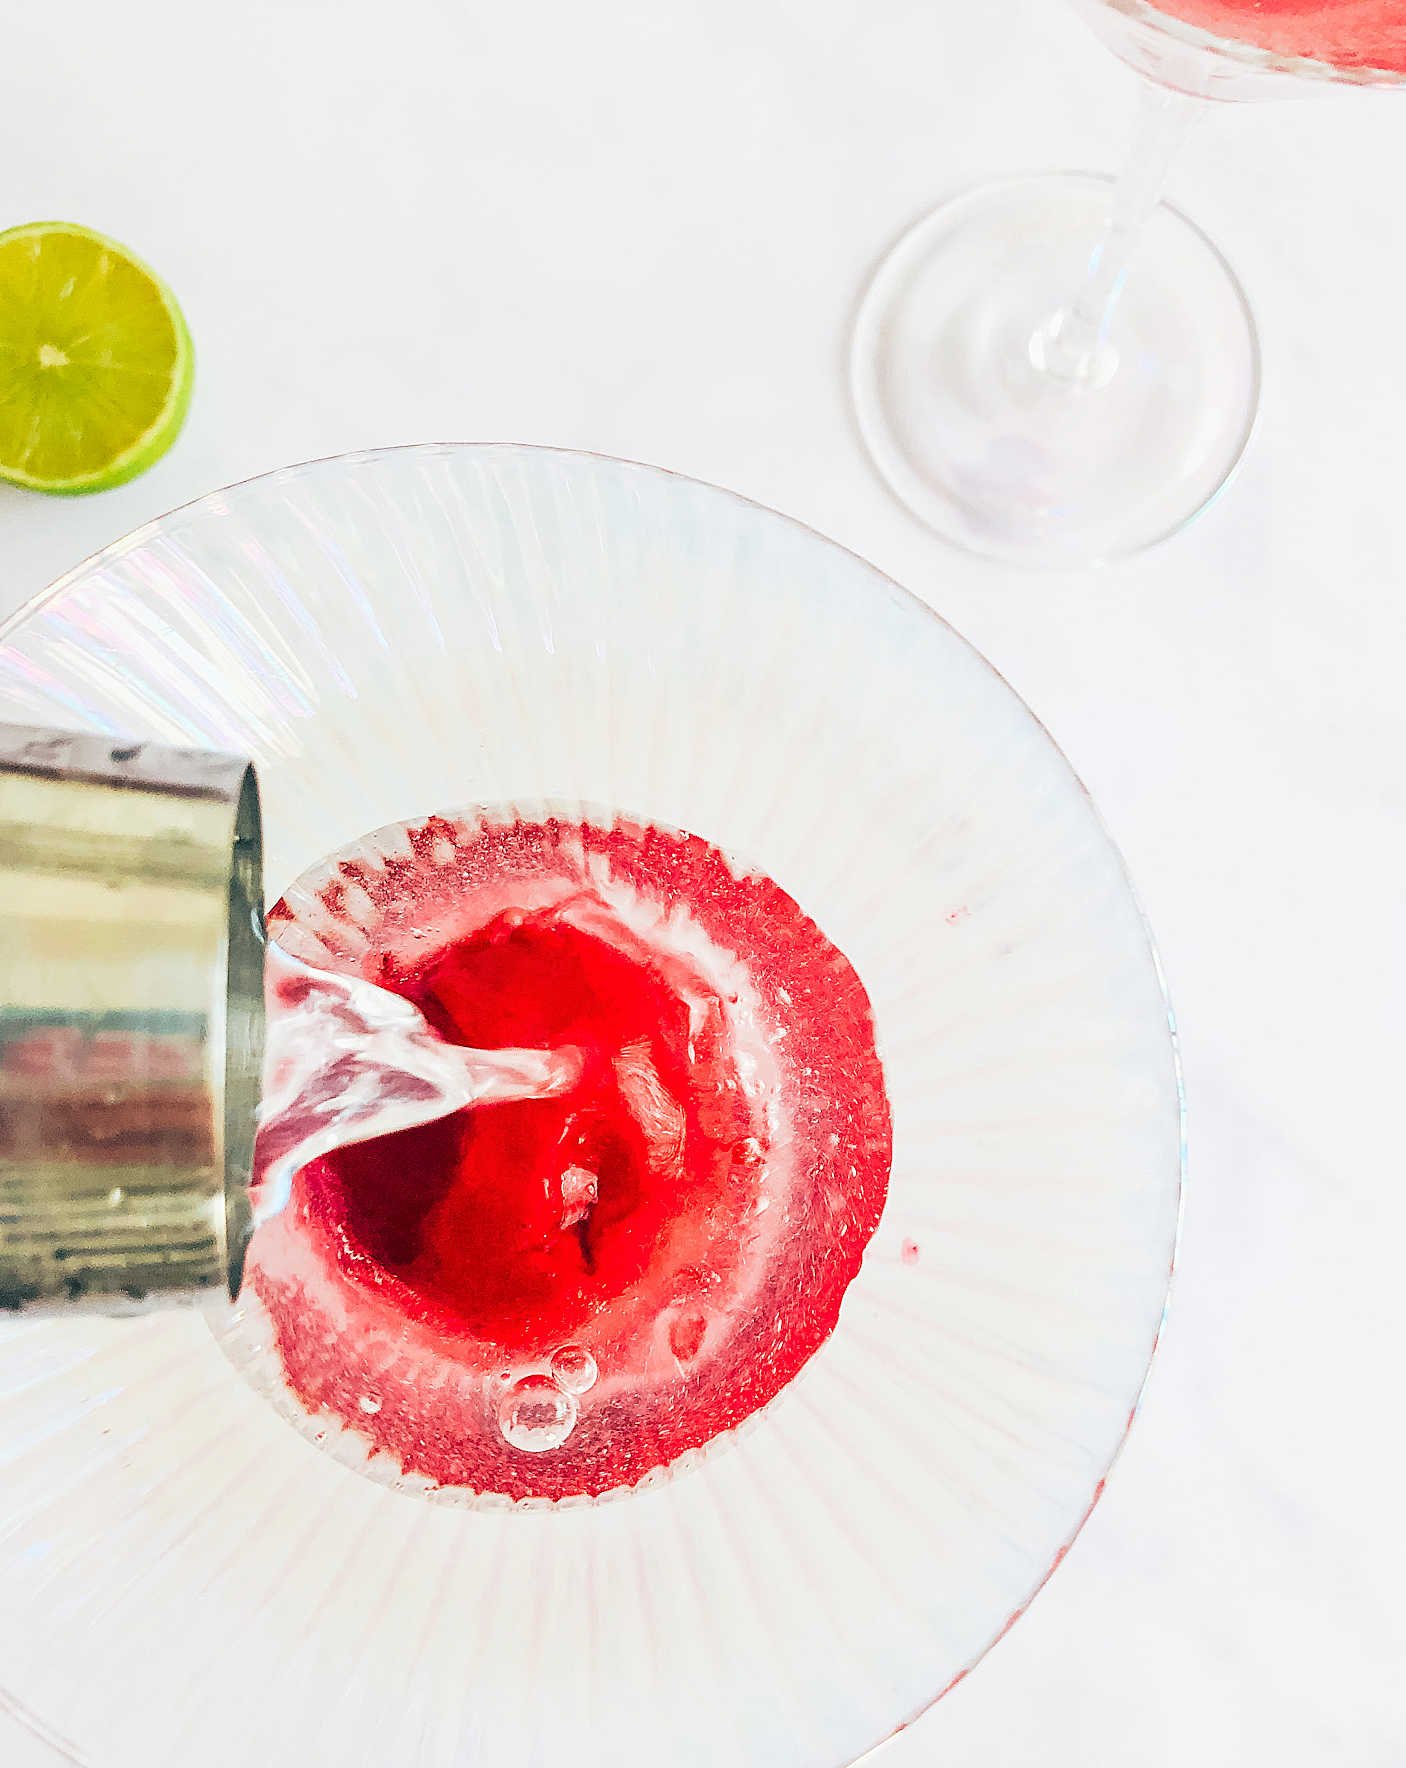 pour your cocktail over the sorbet, give it a second or two and the sorbet will rise to the top